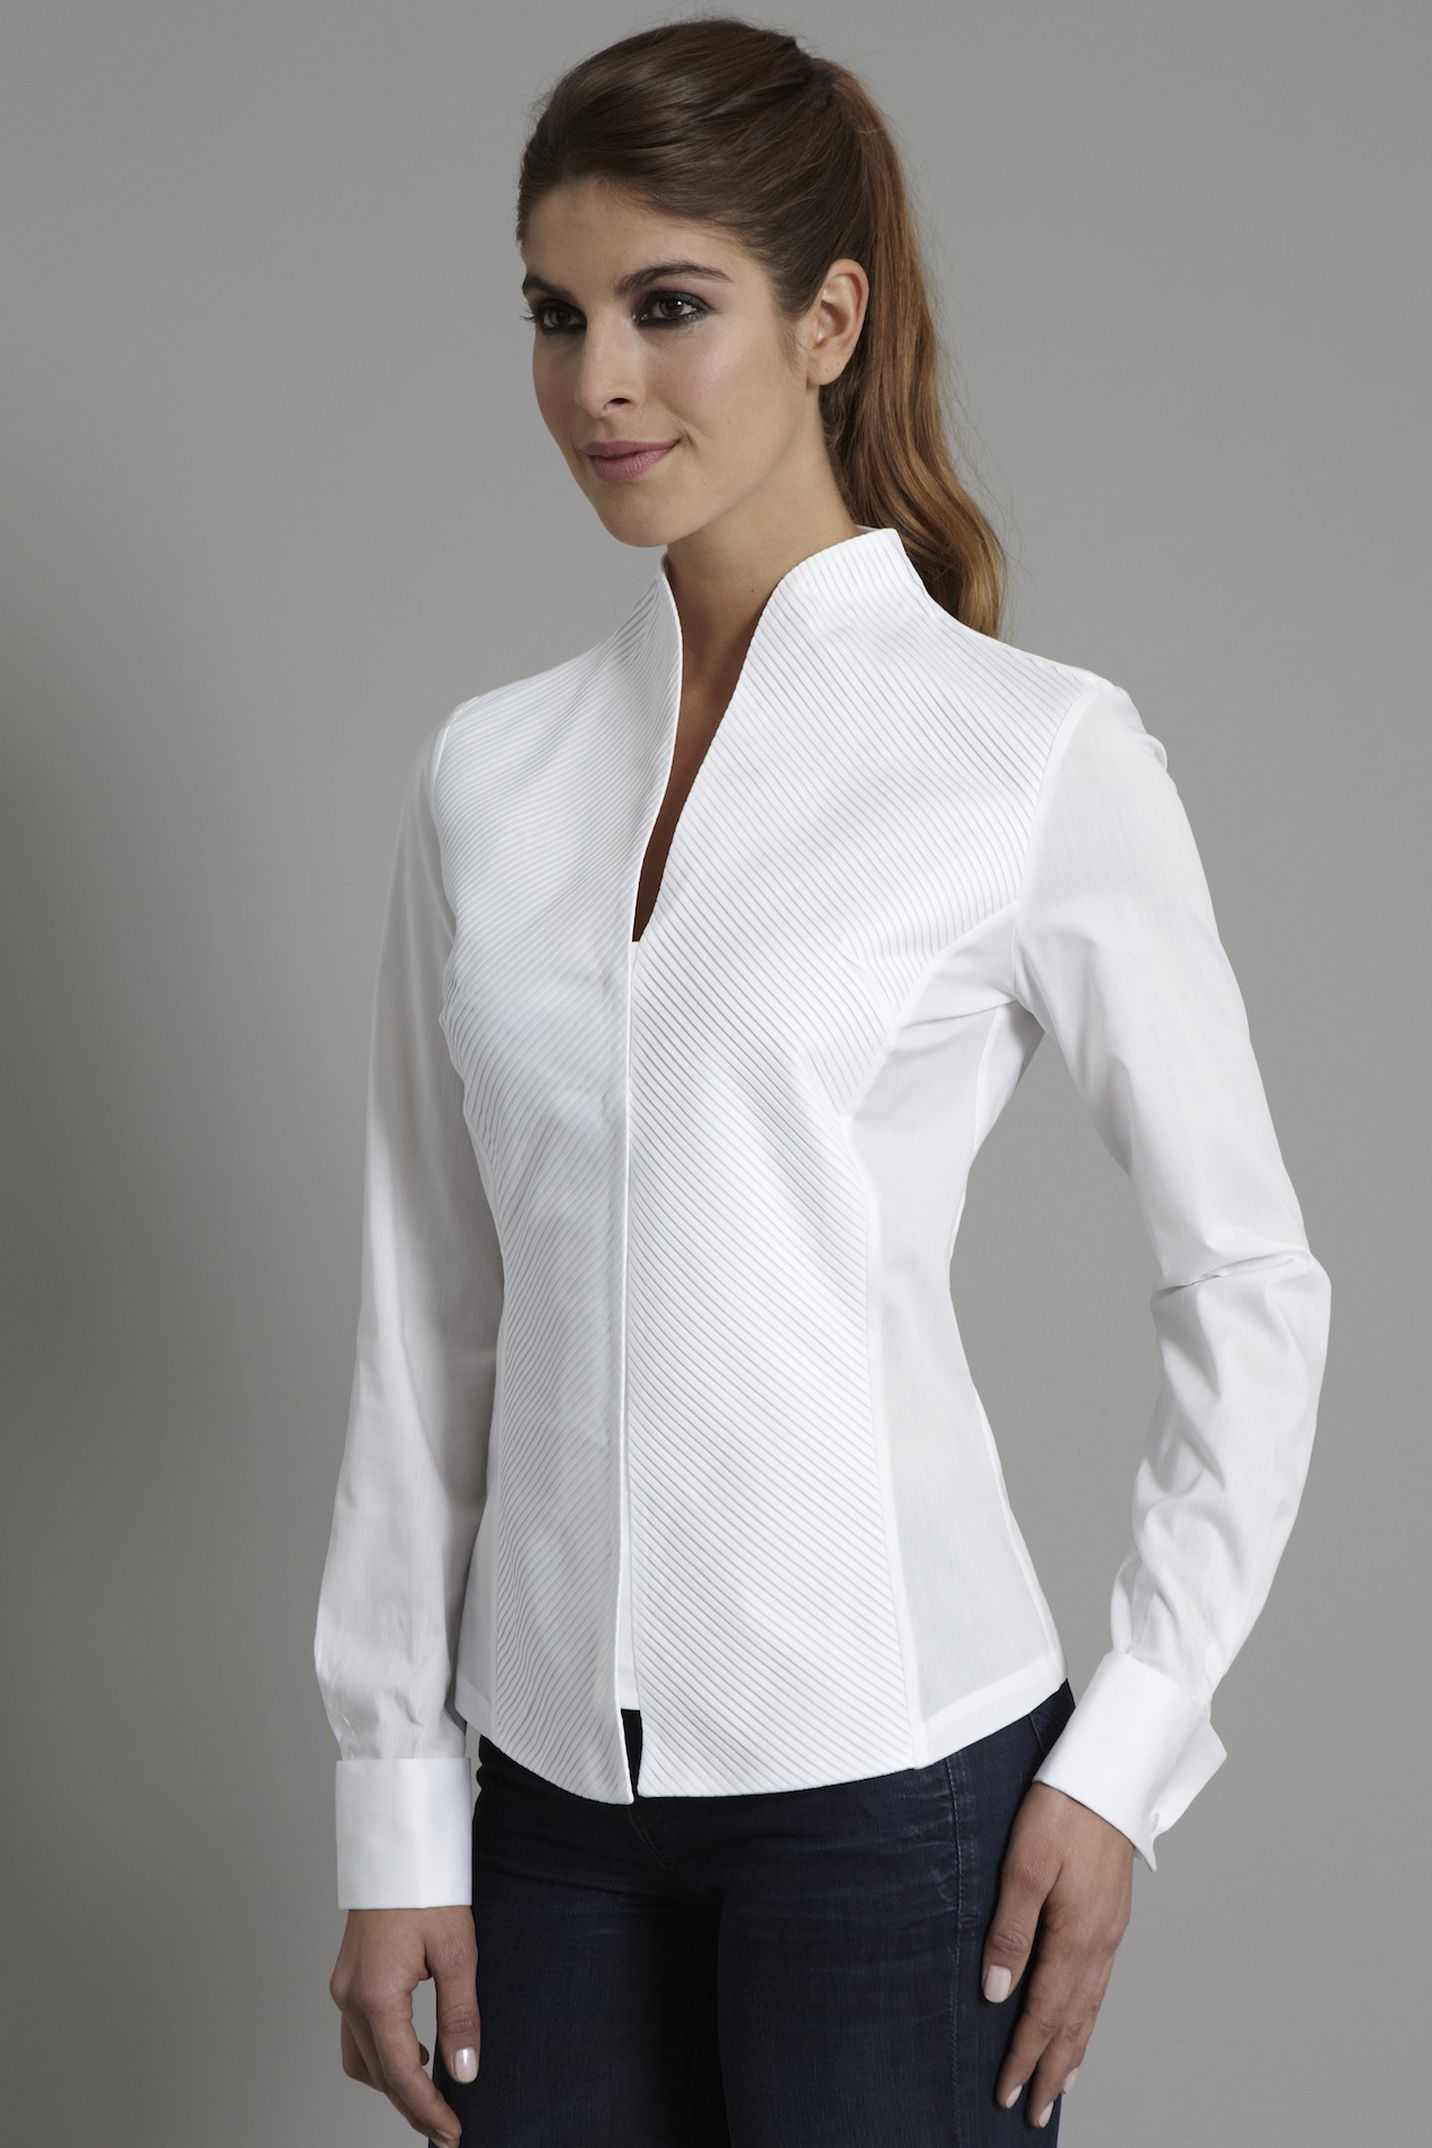 Penelope White Shirt | Collar shirts, Contemporary and Modern